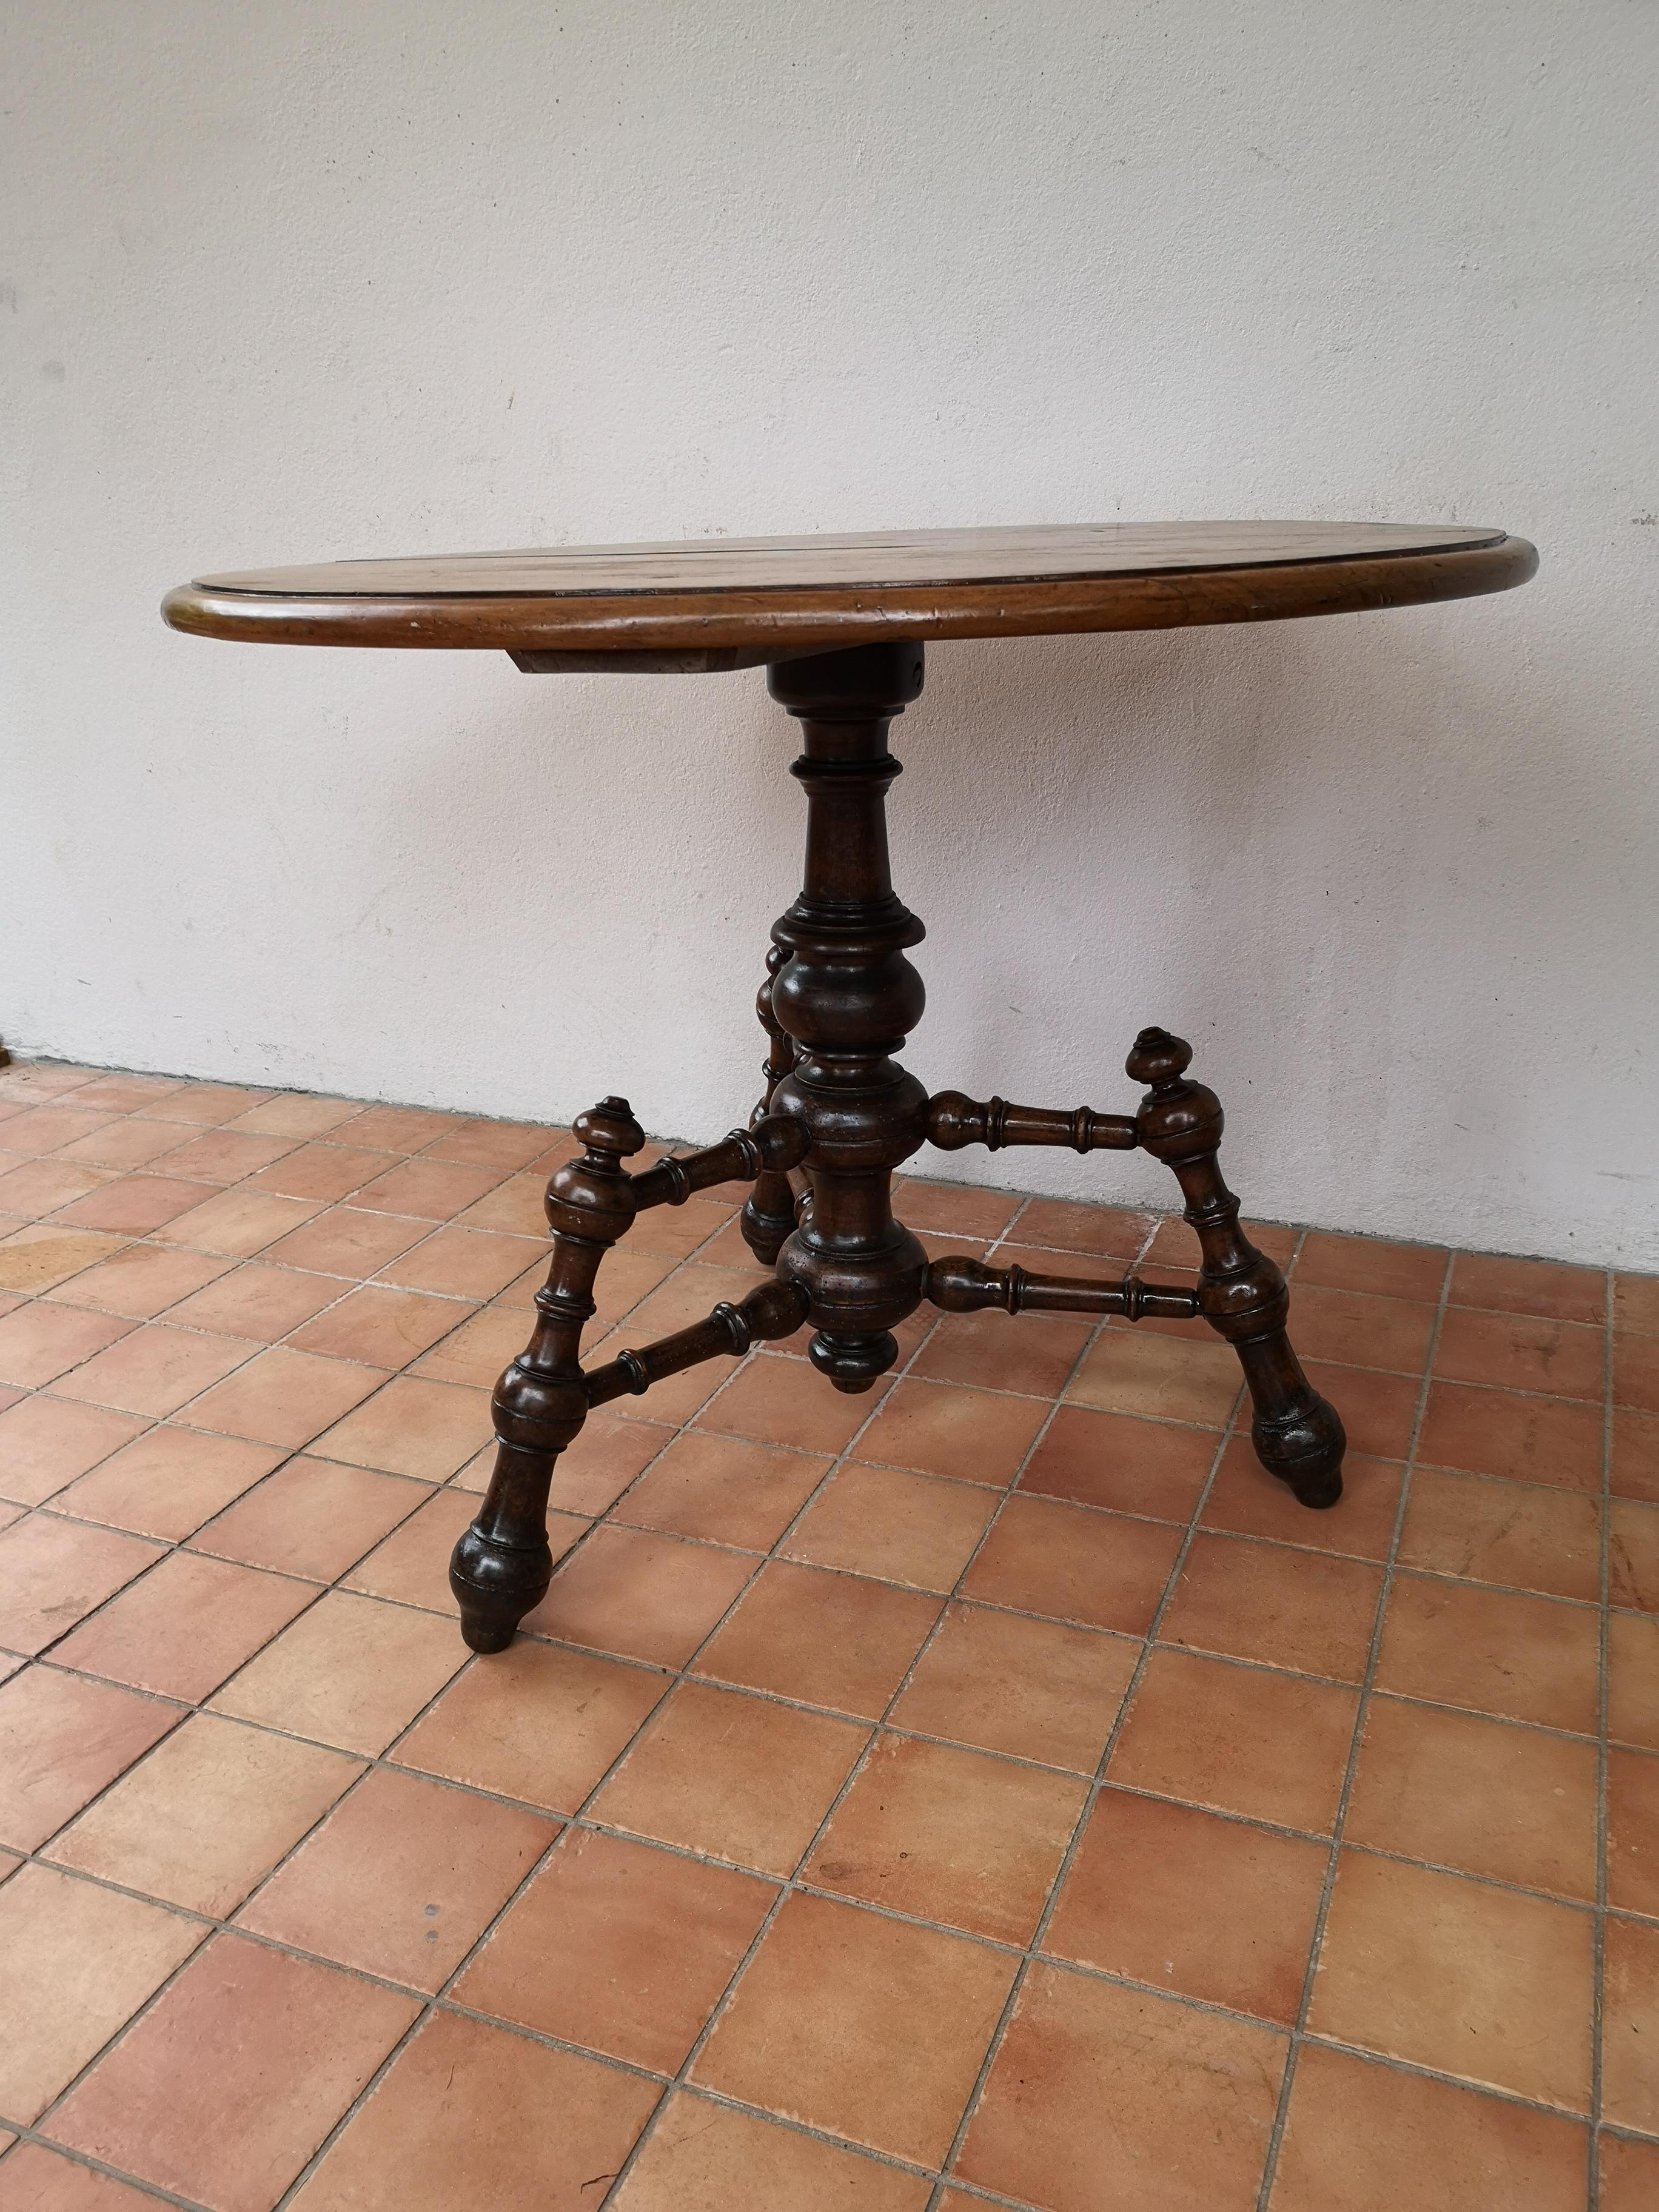 Pedestal table or small tripod table from the end of the 19th century, the legs are in carved wood, oak top, wear of time consistent with age and use, piece of great originality. Goes very well with contemporary furniture.


There are a large